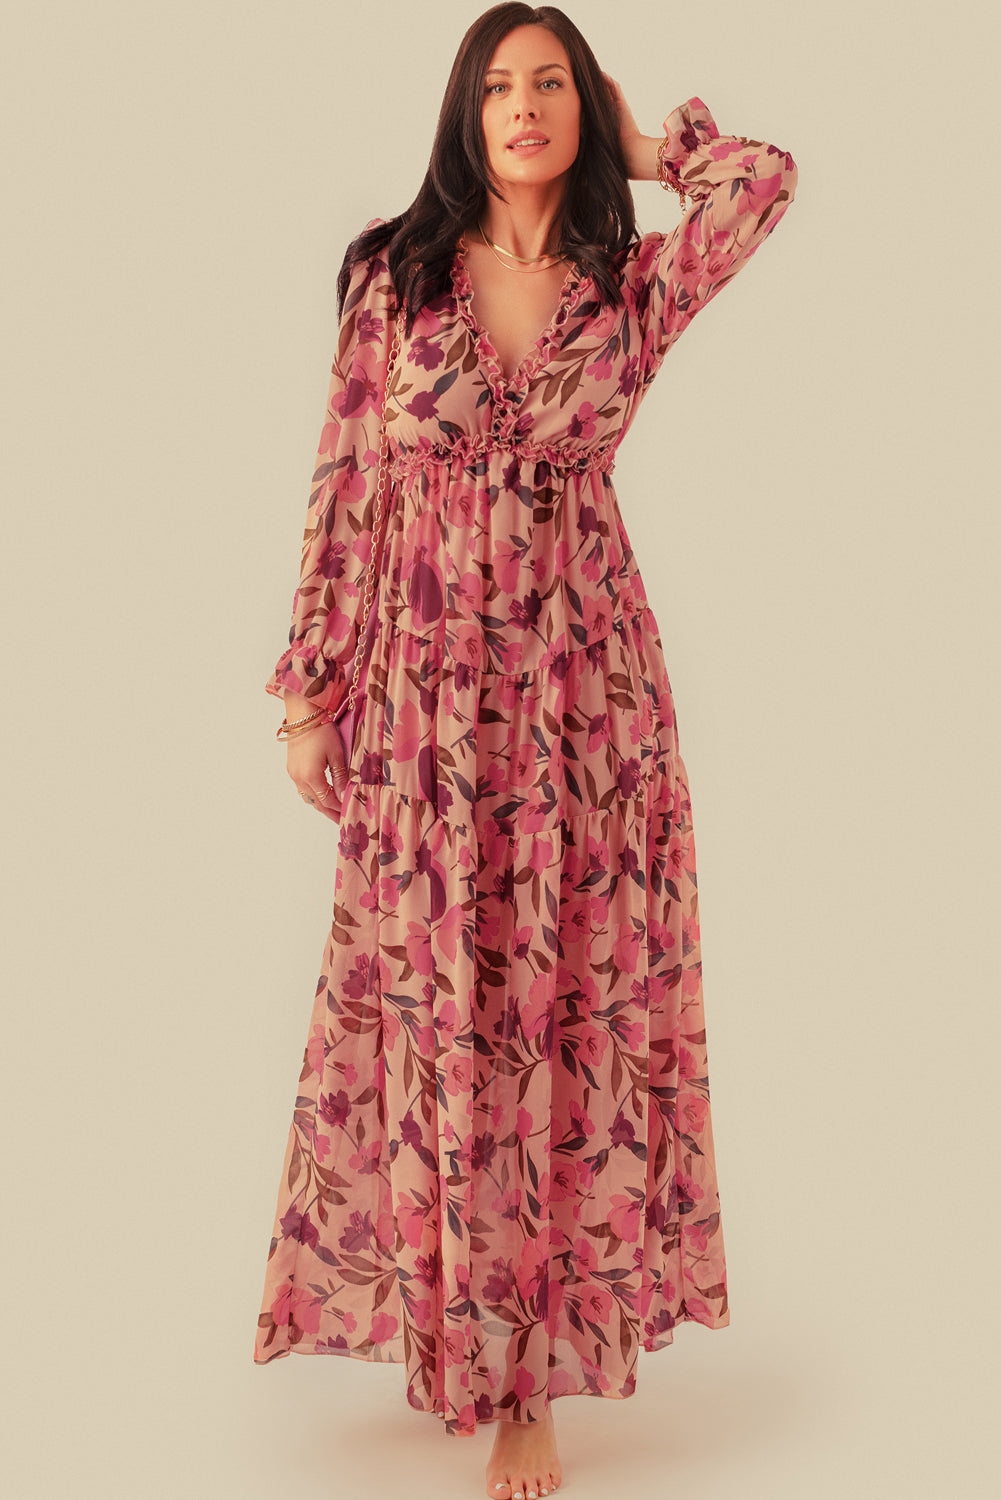 Pastel Red Floral Print Ruffle Trim Plunge Neckline Maxi Dress - Cowtown Bling N Things